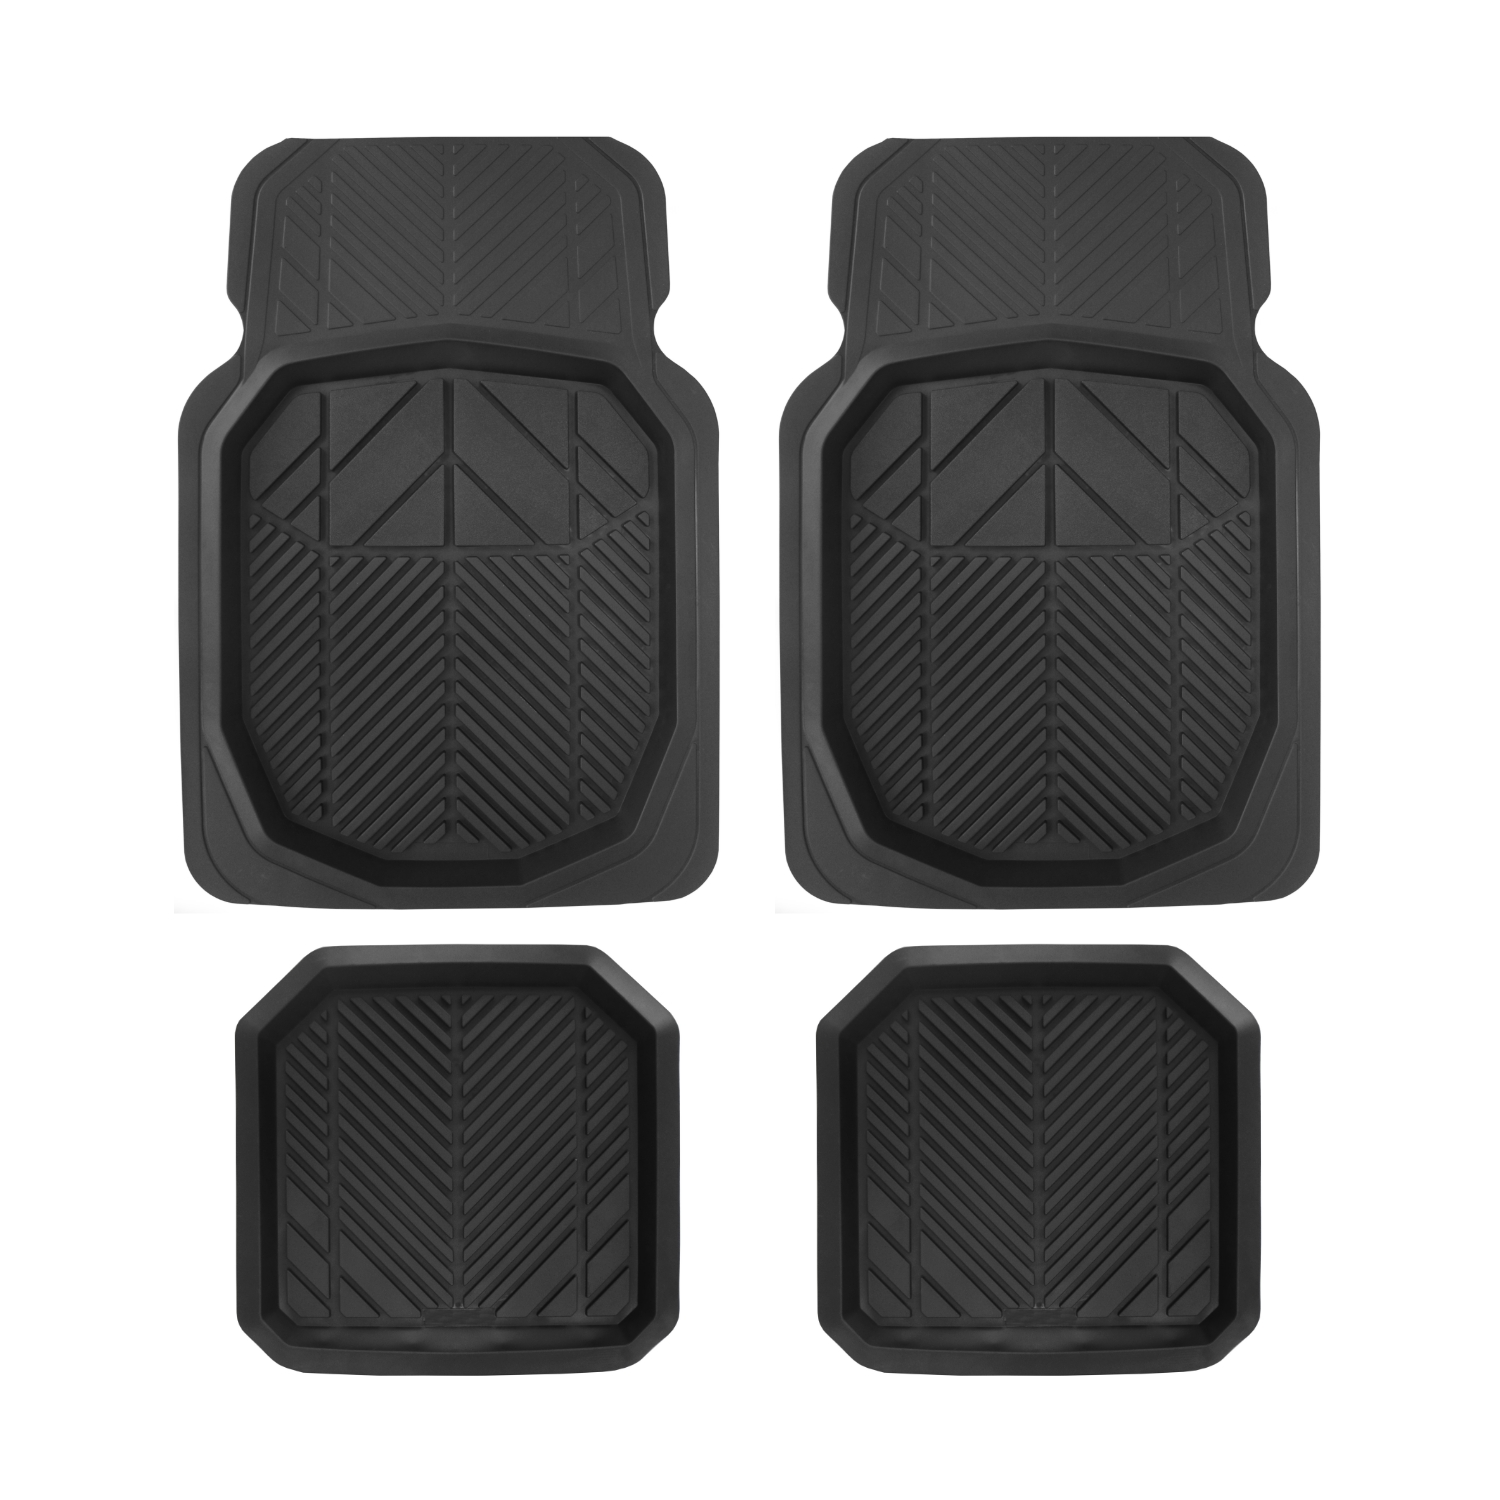 China Wholesale Pvc Mat For Car Factories –  Universal basics 3-Piece All-Weather Protection Heavy Duty Rubber Floor Mats for Cars, SUVs, and Trucks 1884 – Litai